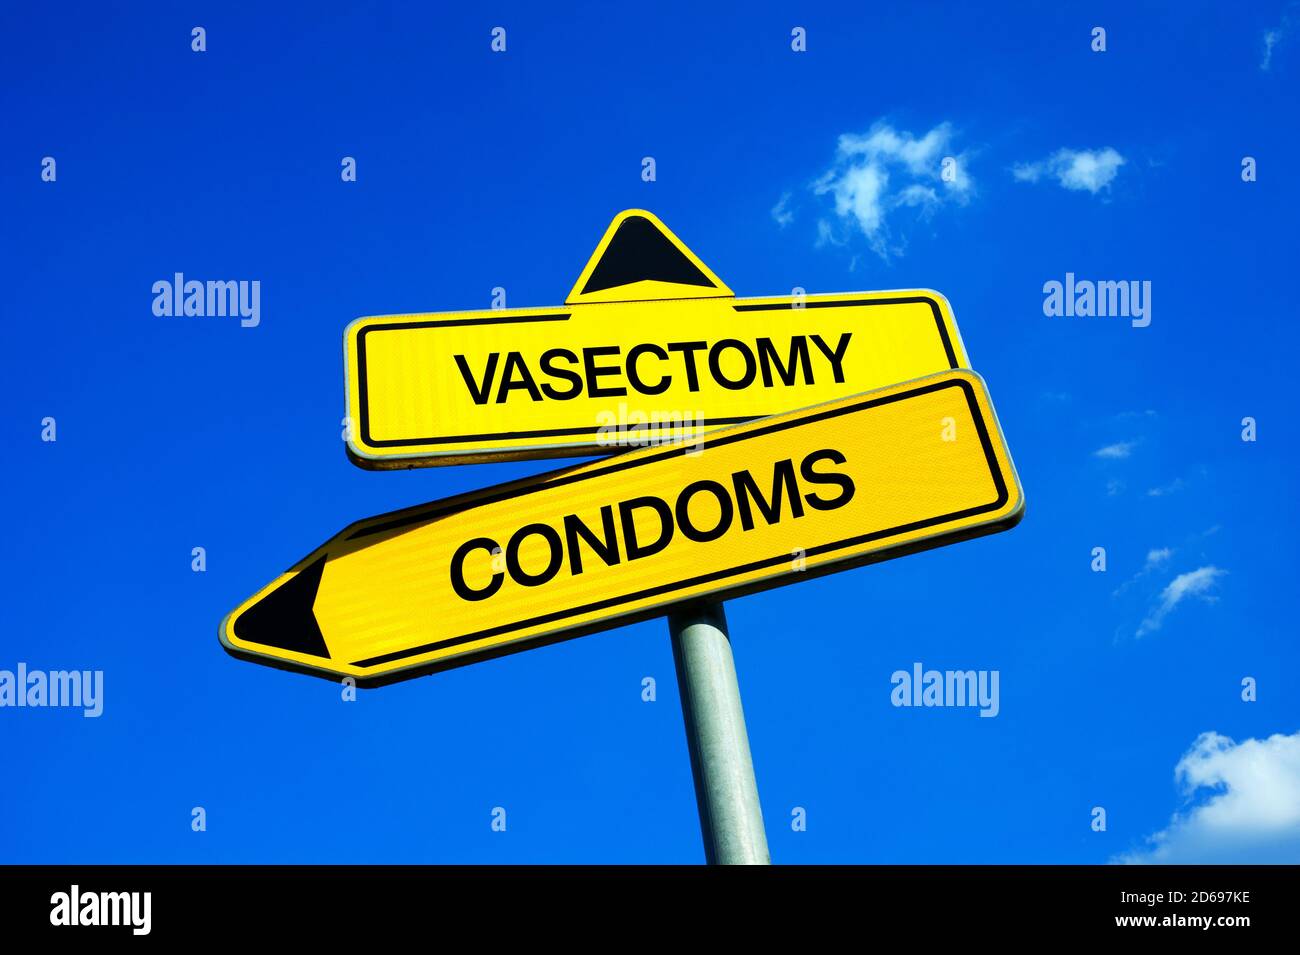 Vasectomy vs Condoms - Traffic sign with two options - male contraception and birth control. Irreversible, permanent and definitive surgery leading to Stock Photo